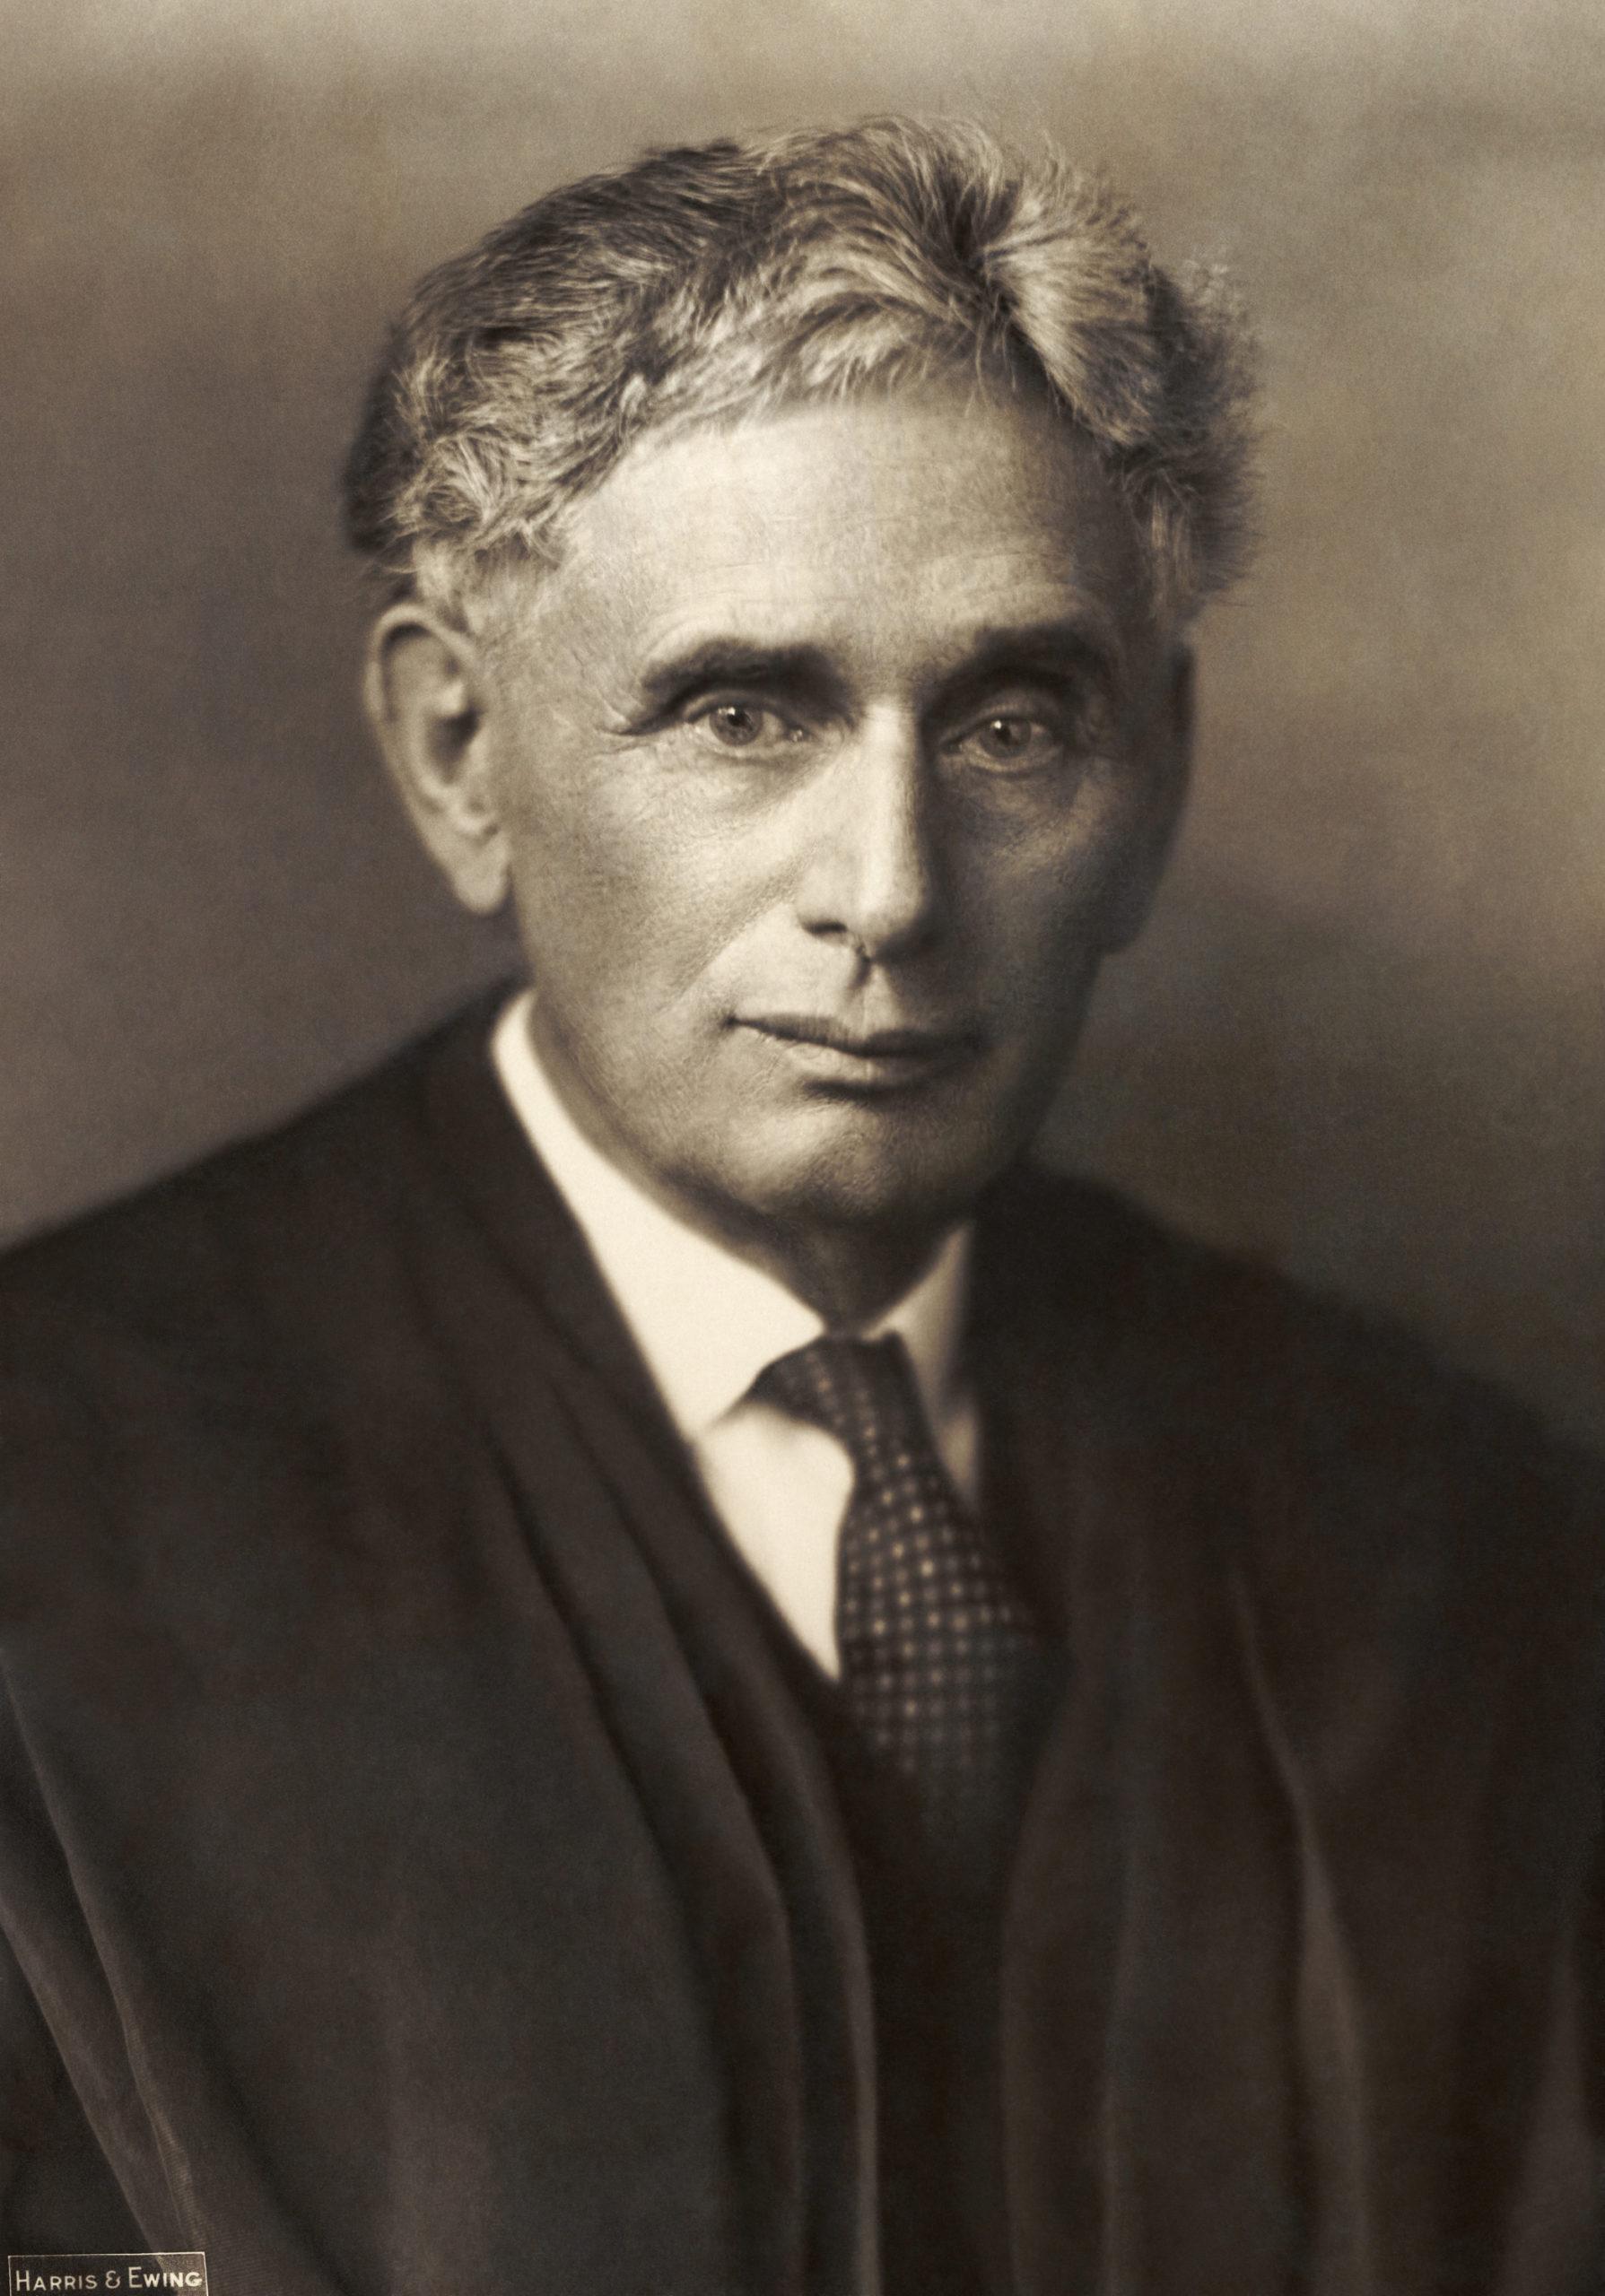 Louis D. Brandeis - If you would only recognize that life